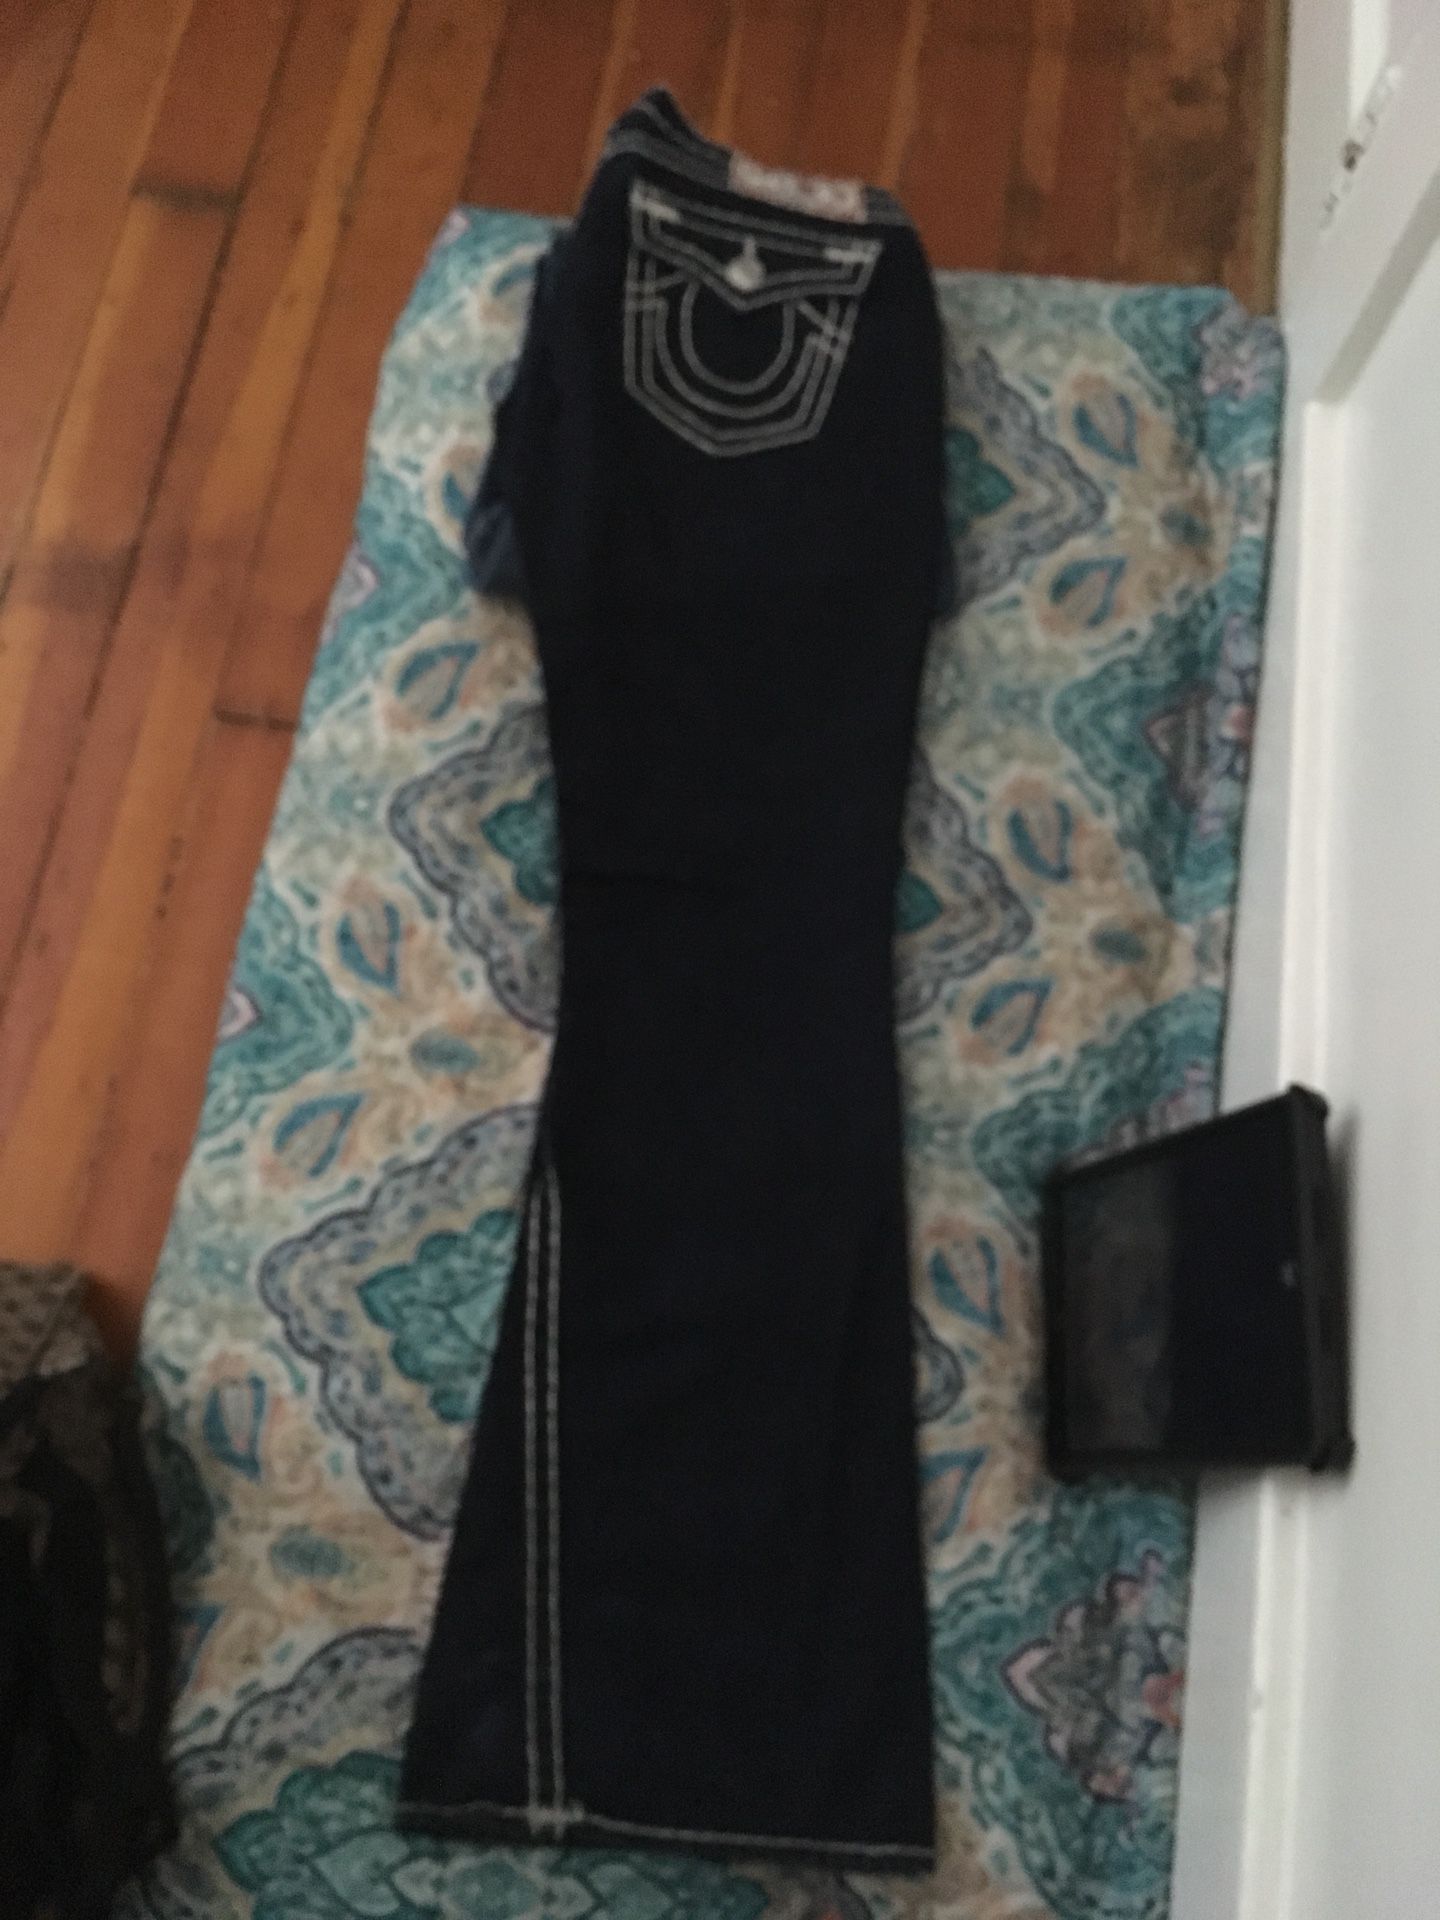 Louis Raphael Dress Pants for Sale in Brentwood, CA - OfferUp